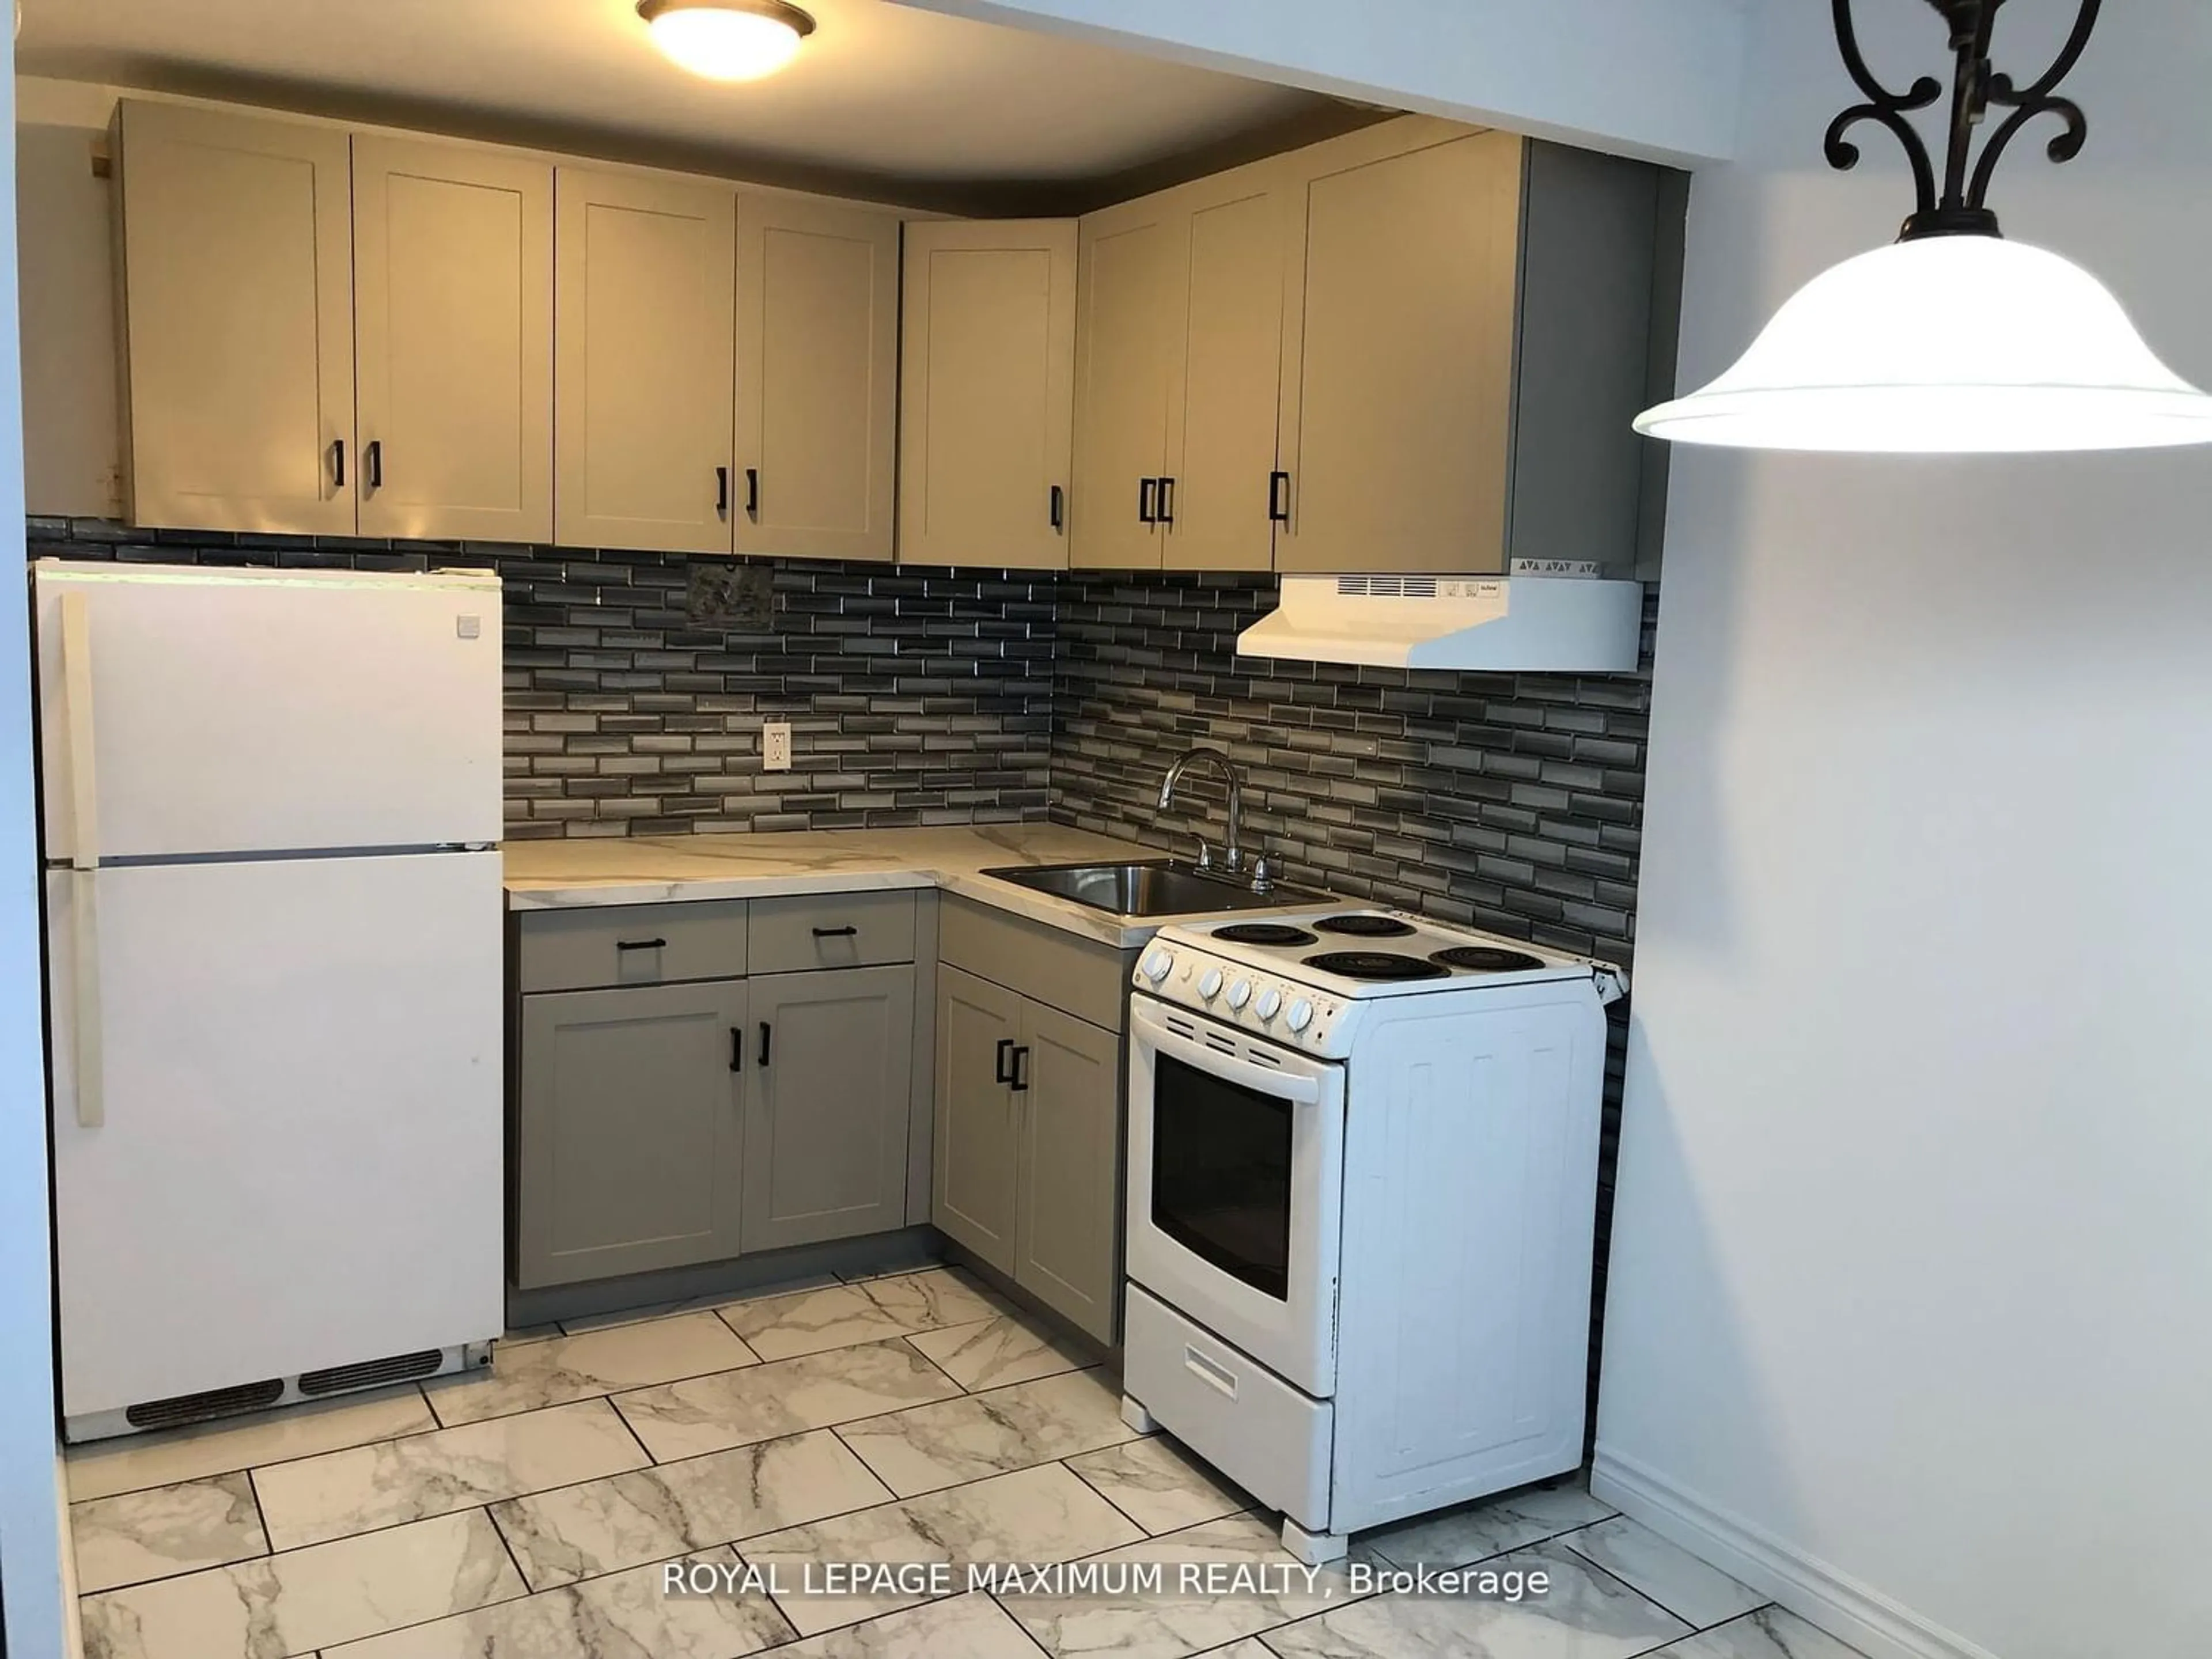 Standard kitchen for 55 Neptune Dr #105, Toronto Ontario M6A 1X2